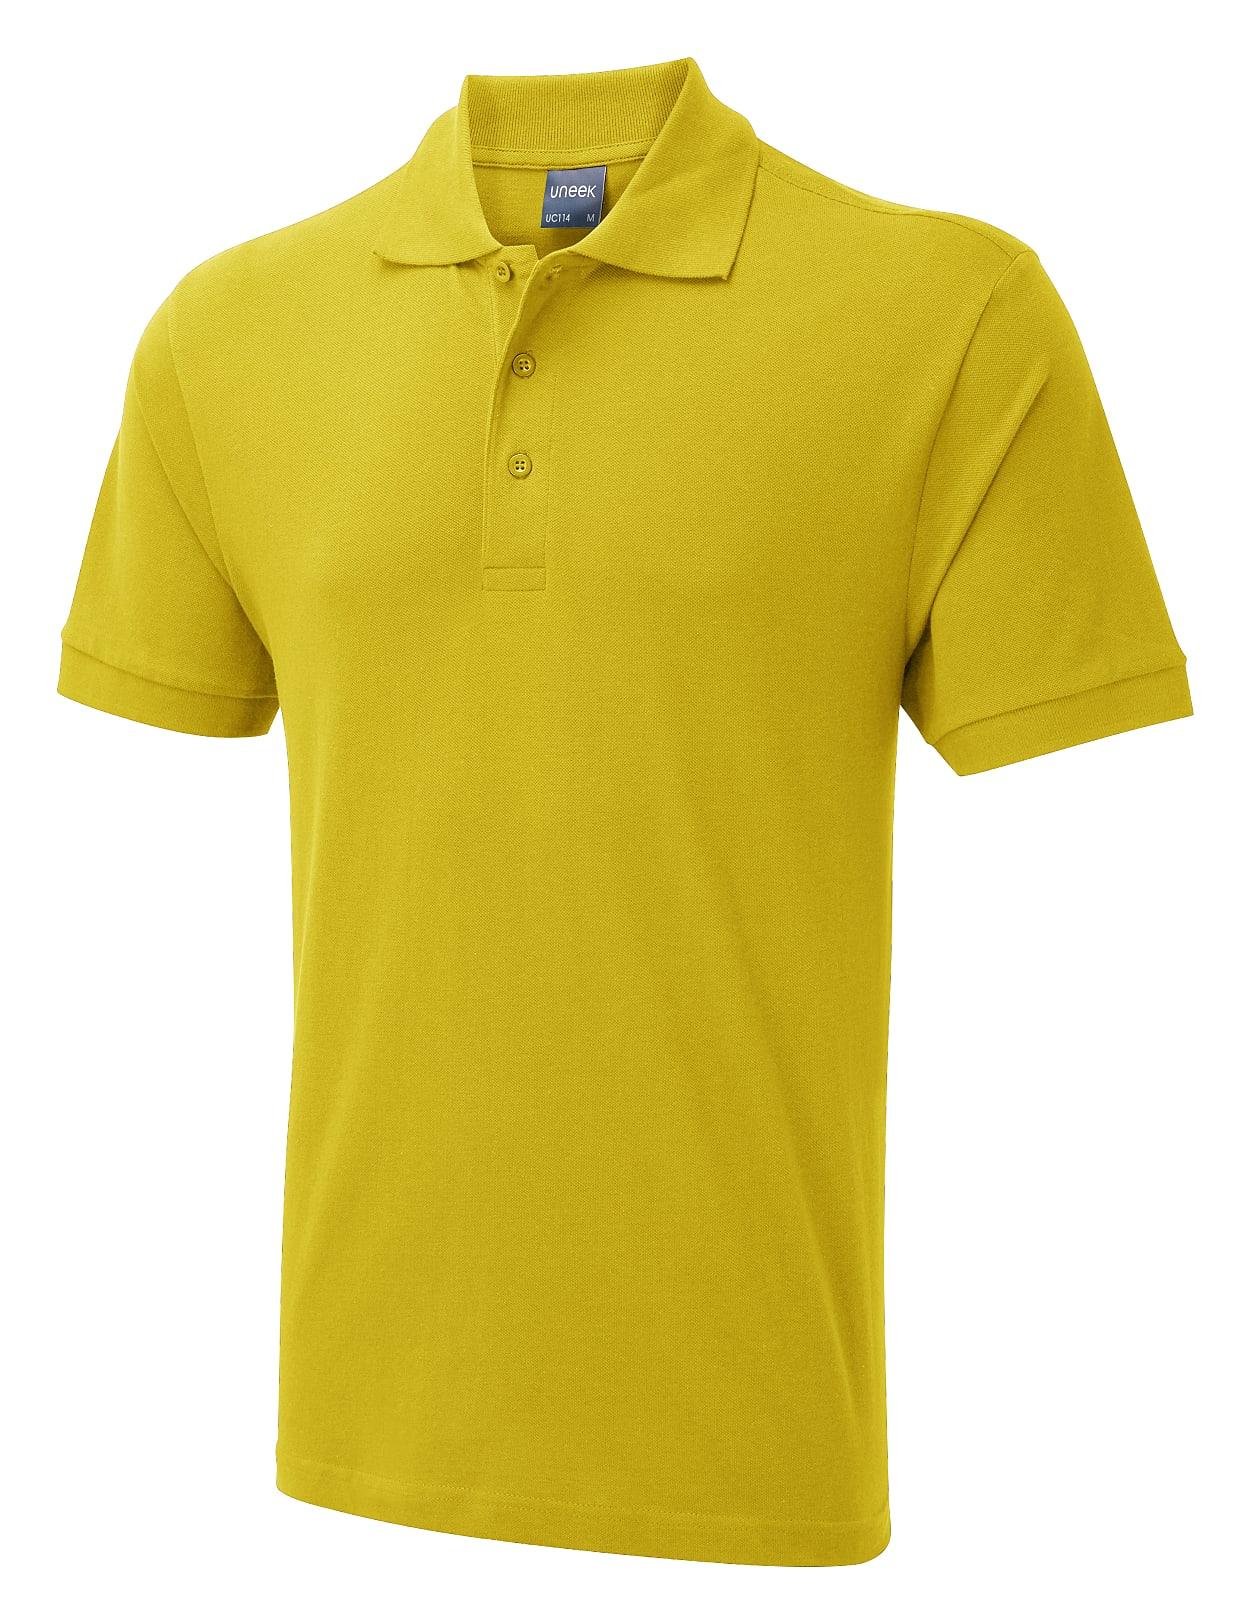 Uneek 180GSM Mens Polo Shirt in Yellow (Product Code: UC114)